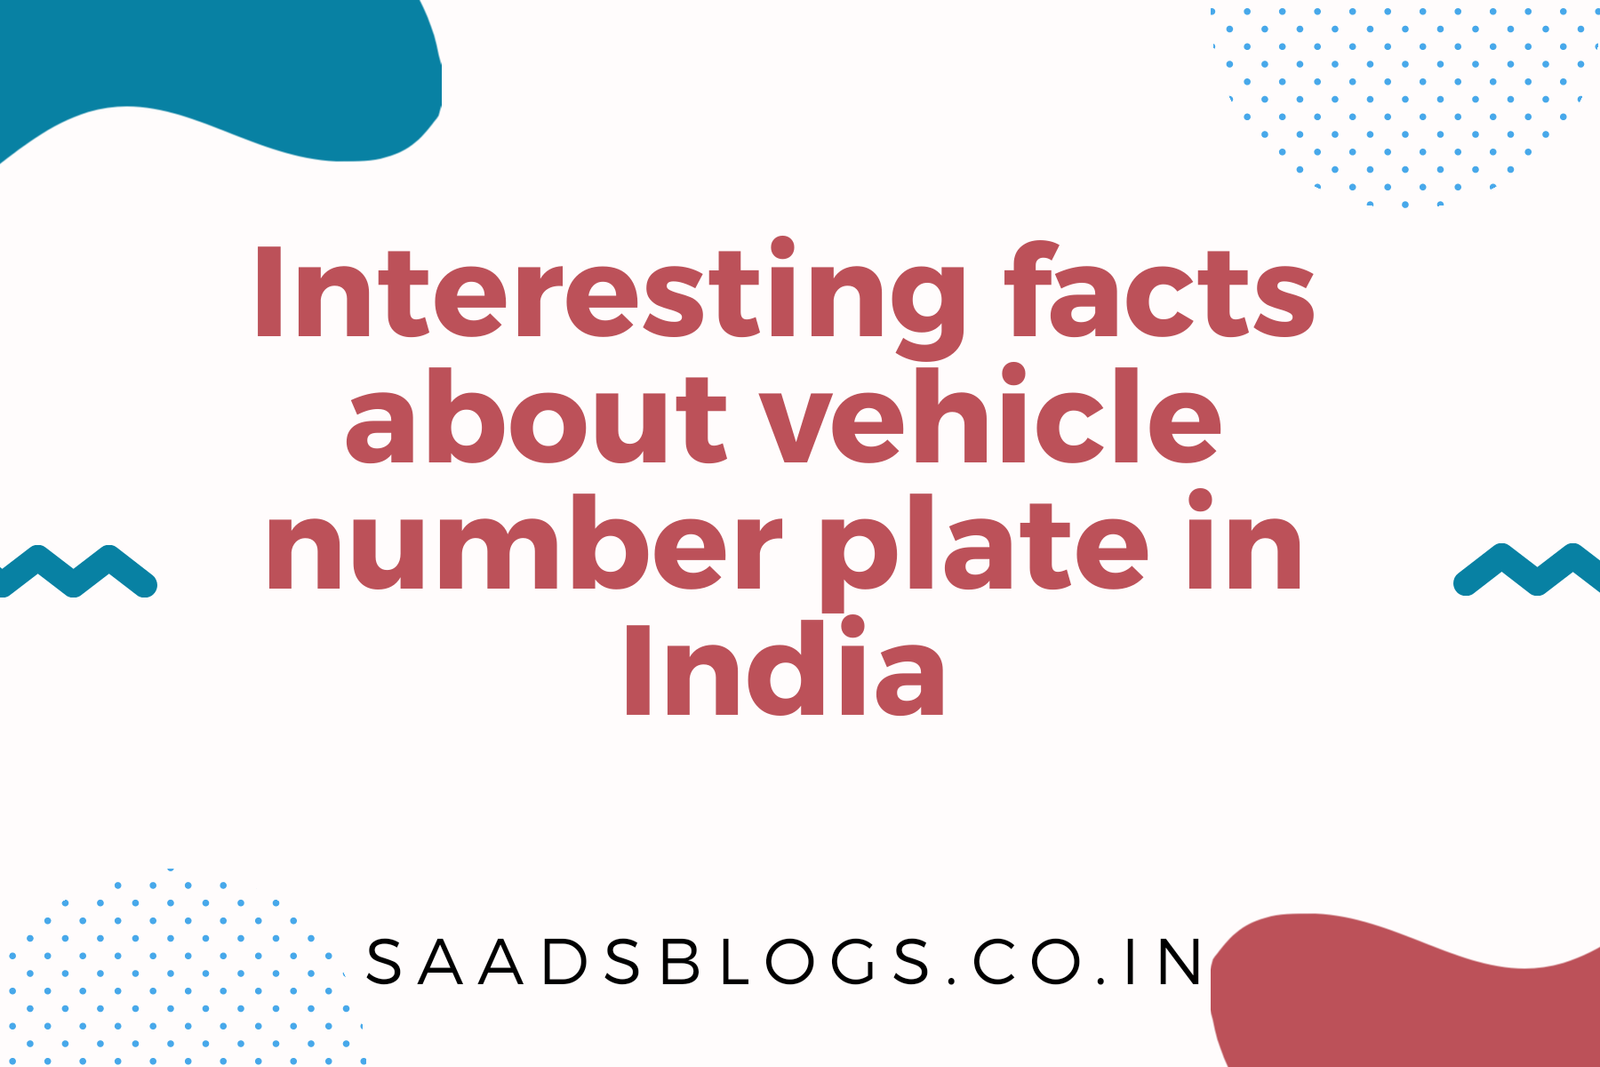 Interesting facts about vehicle number plates in India.